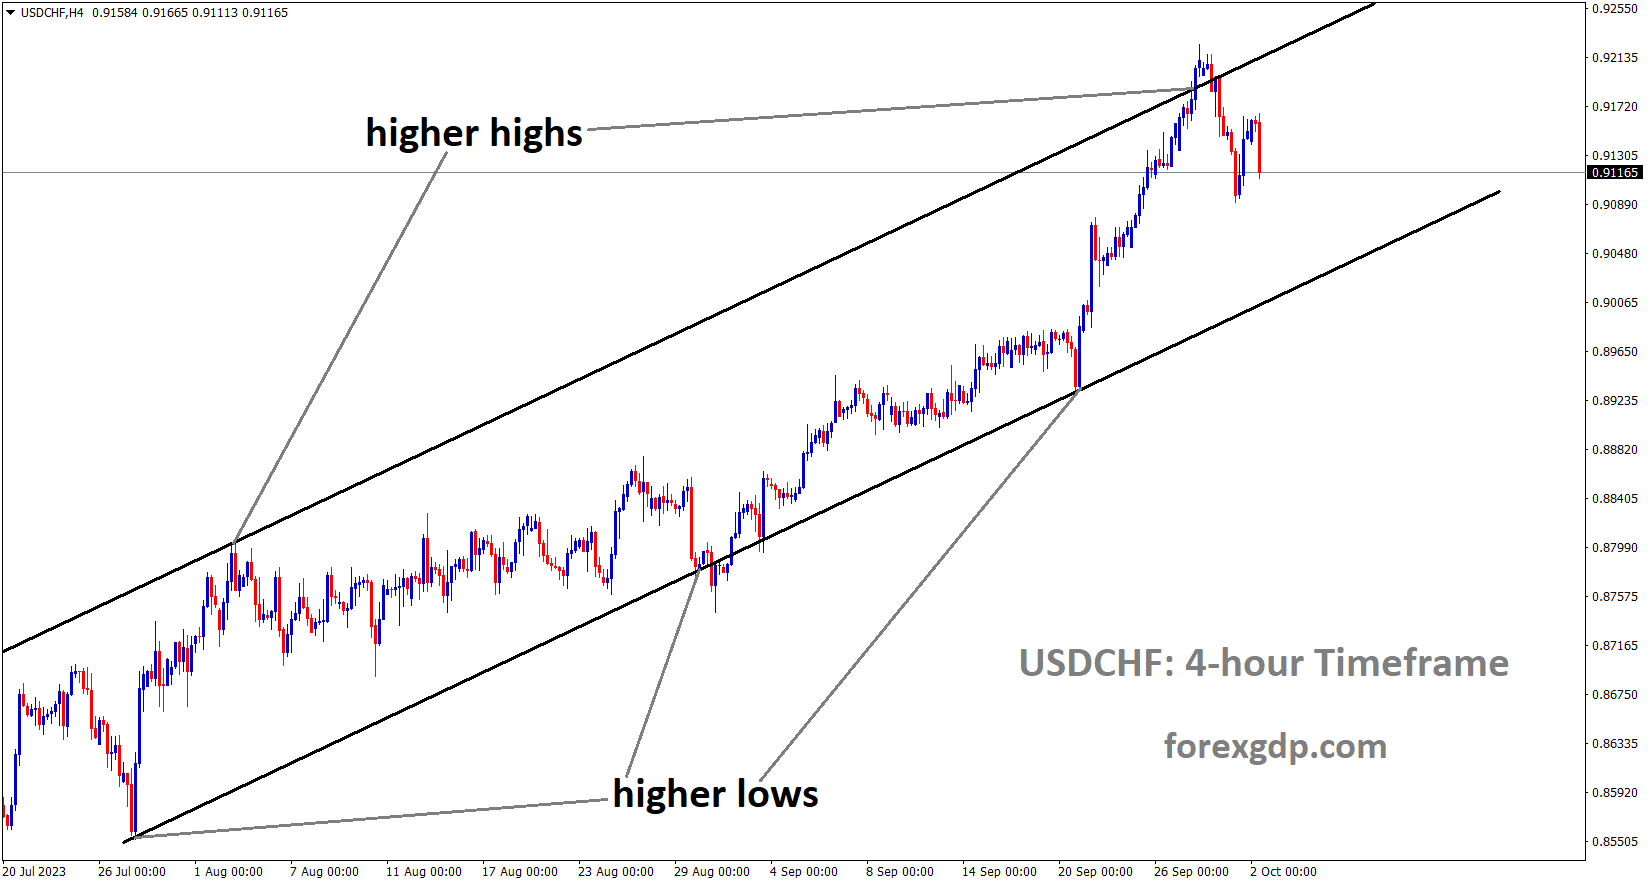 USDCHF is moving in an Ascending channel and the market has fallen from the higher high area of the channel